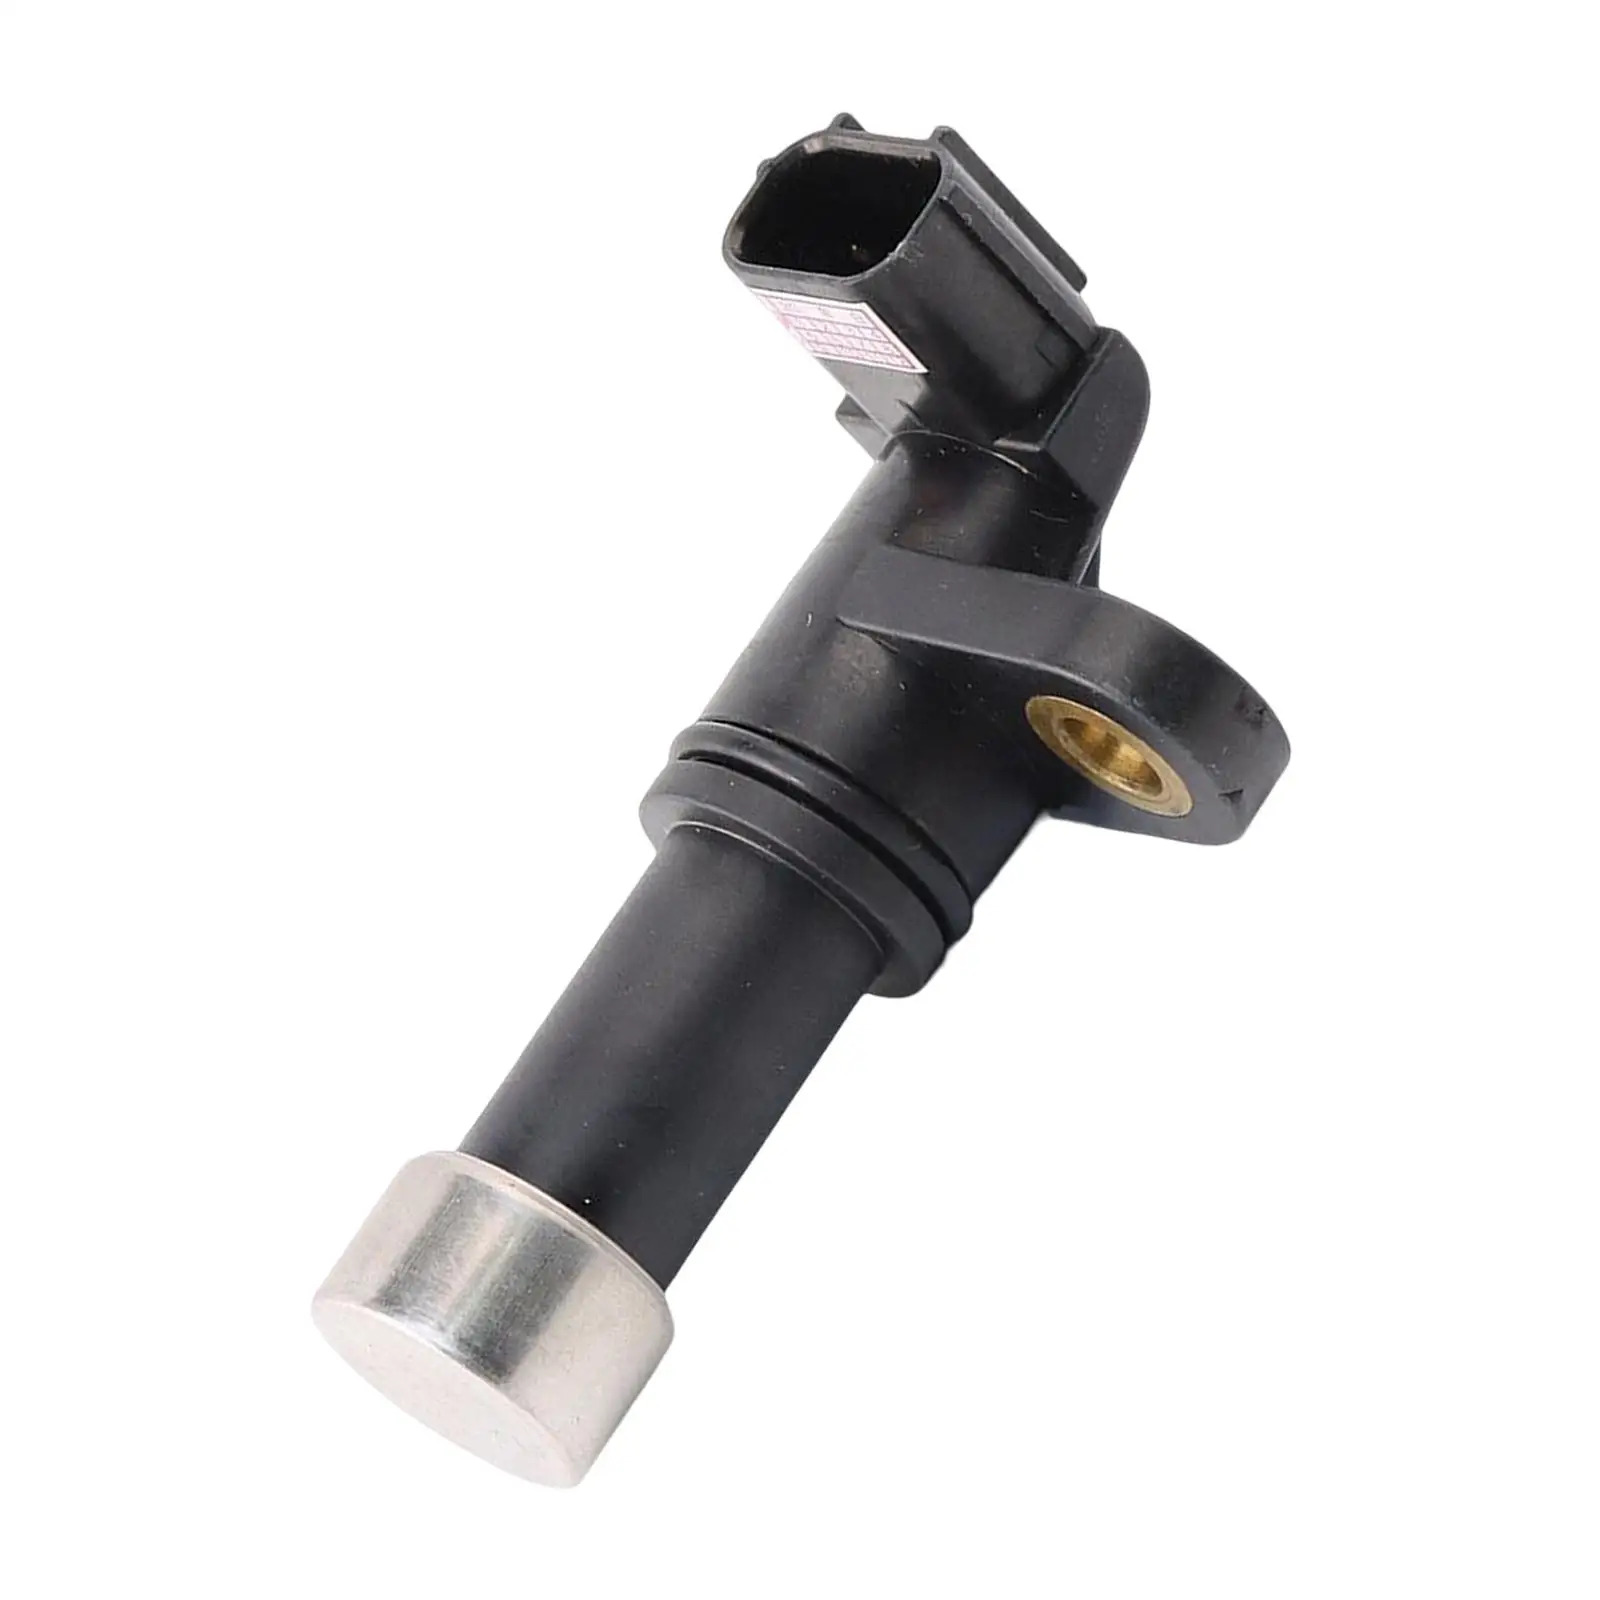 Auto Trans Input Output Vehicle Speed Sensor 28810-Rpc-013 for Honda Civic Fit Accessory High Quality